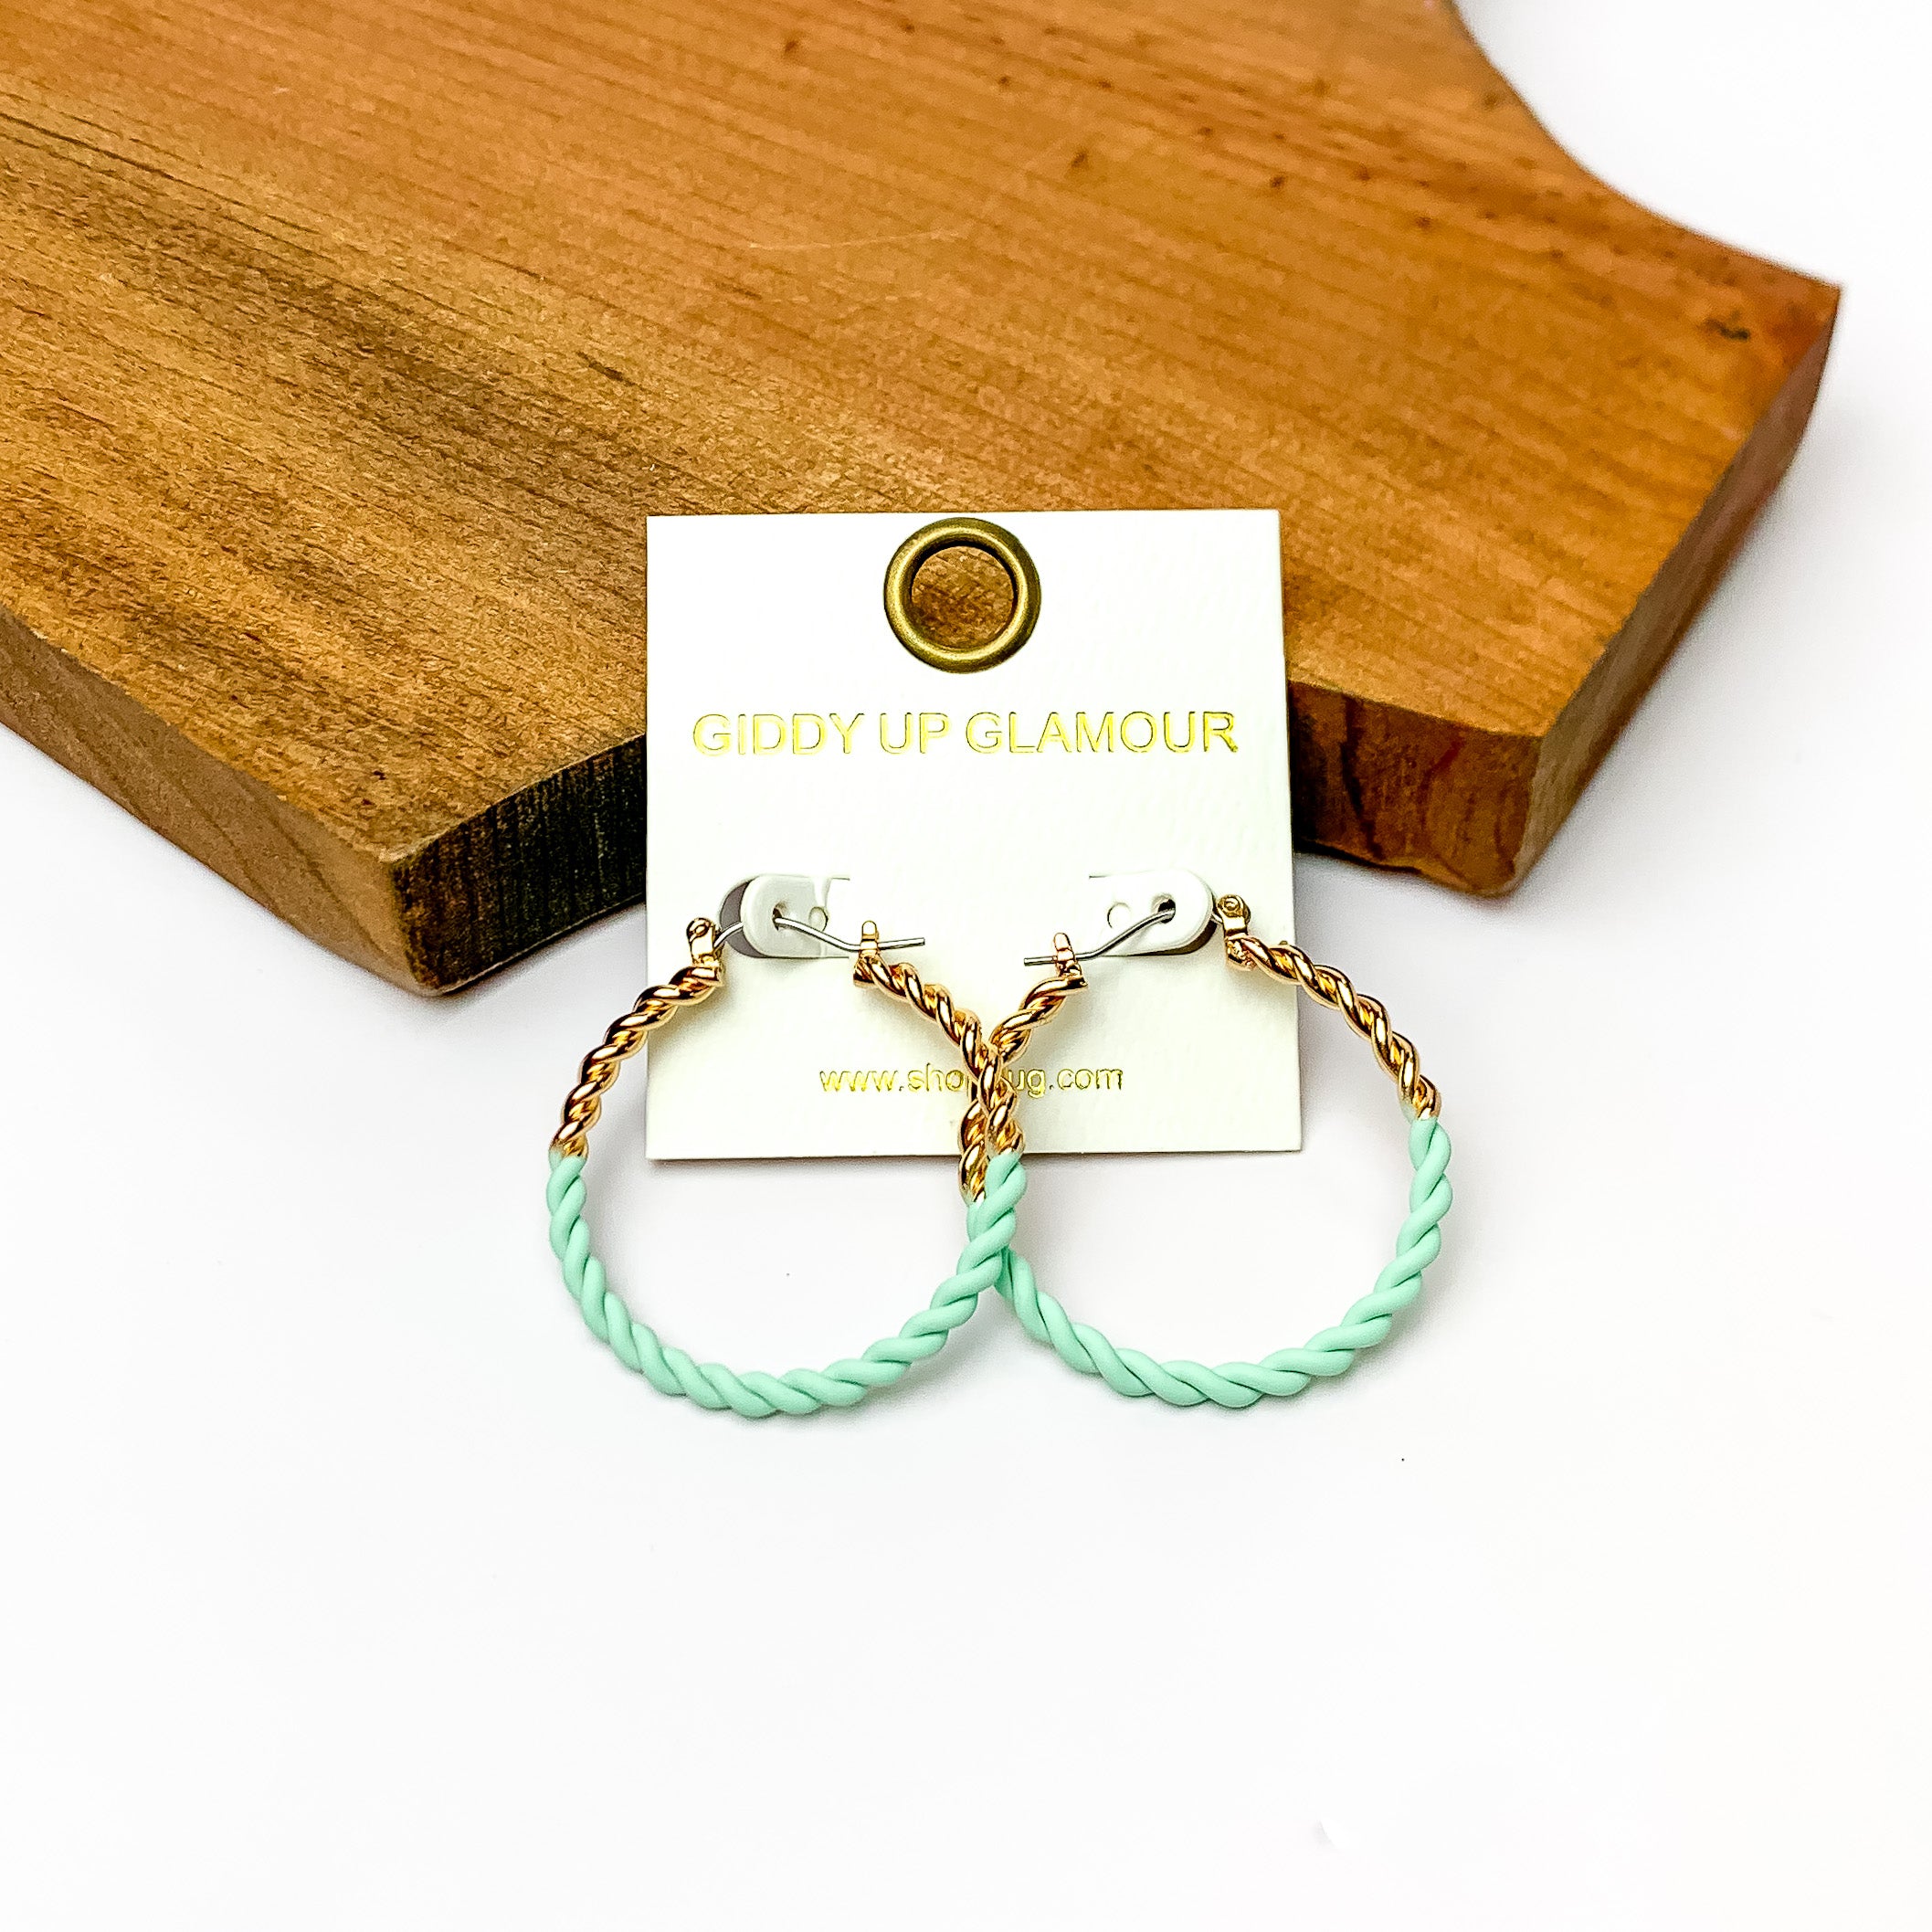 Twisted Gold Tone Hoop Earrings in Mint Green. Pictured on a white background with a wood piece behind it.